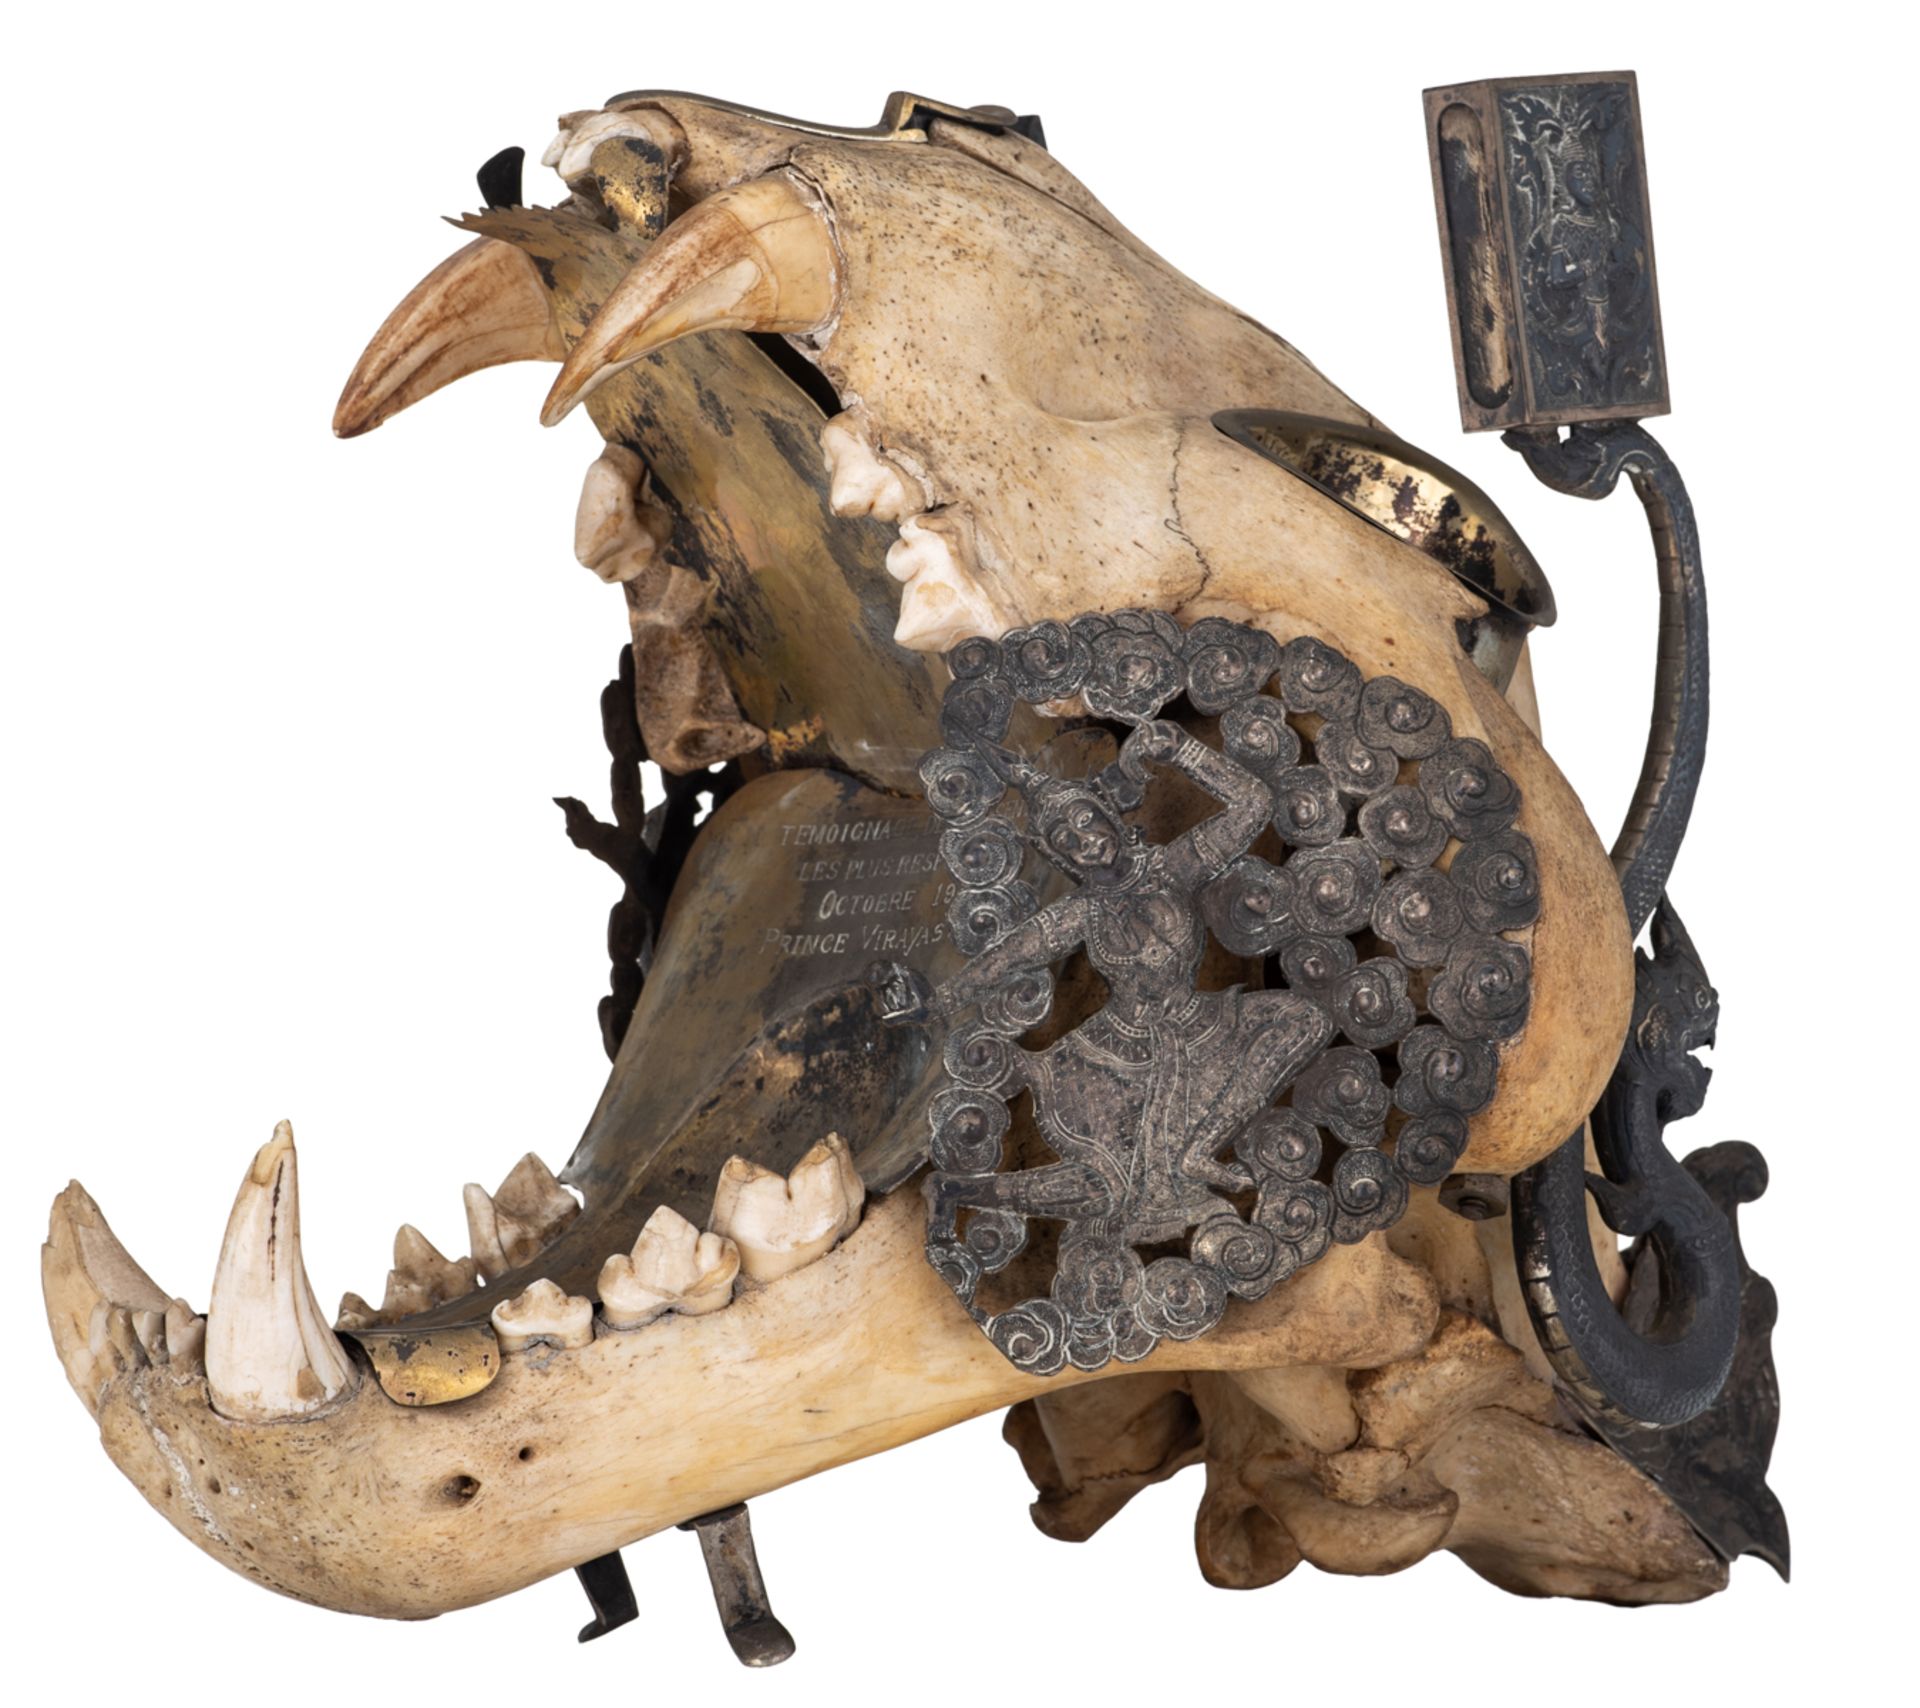 The skull of a Bengal tiger as a bizarre hunting trophy transformed into smokers gear with silver mo